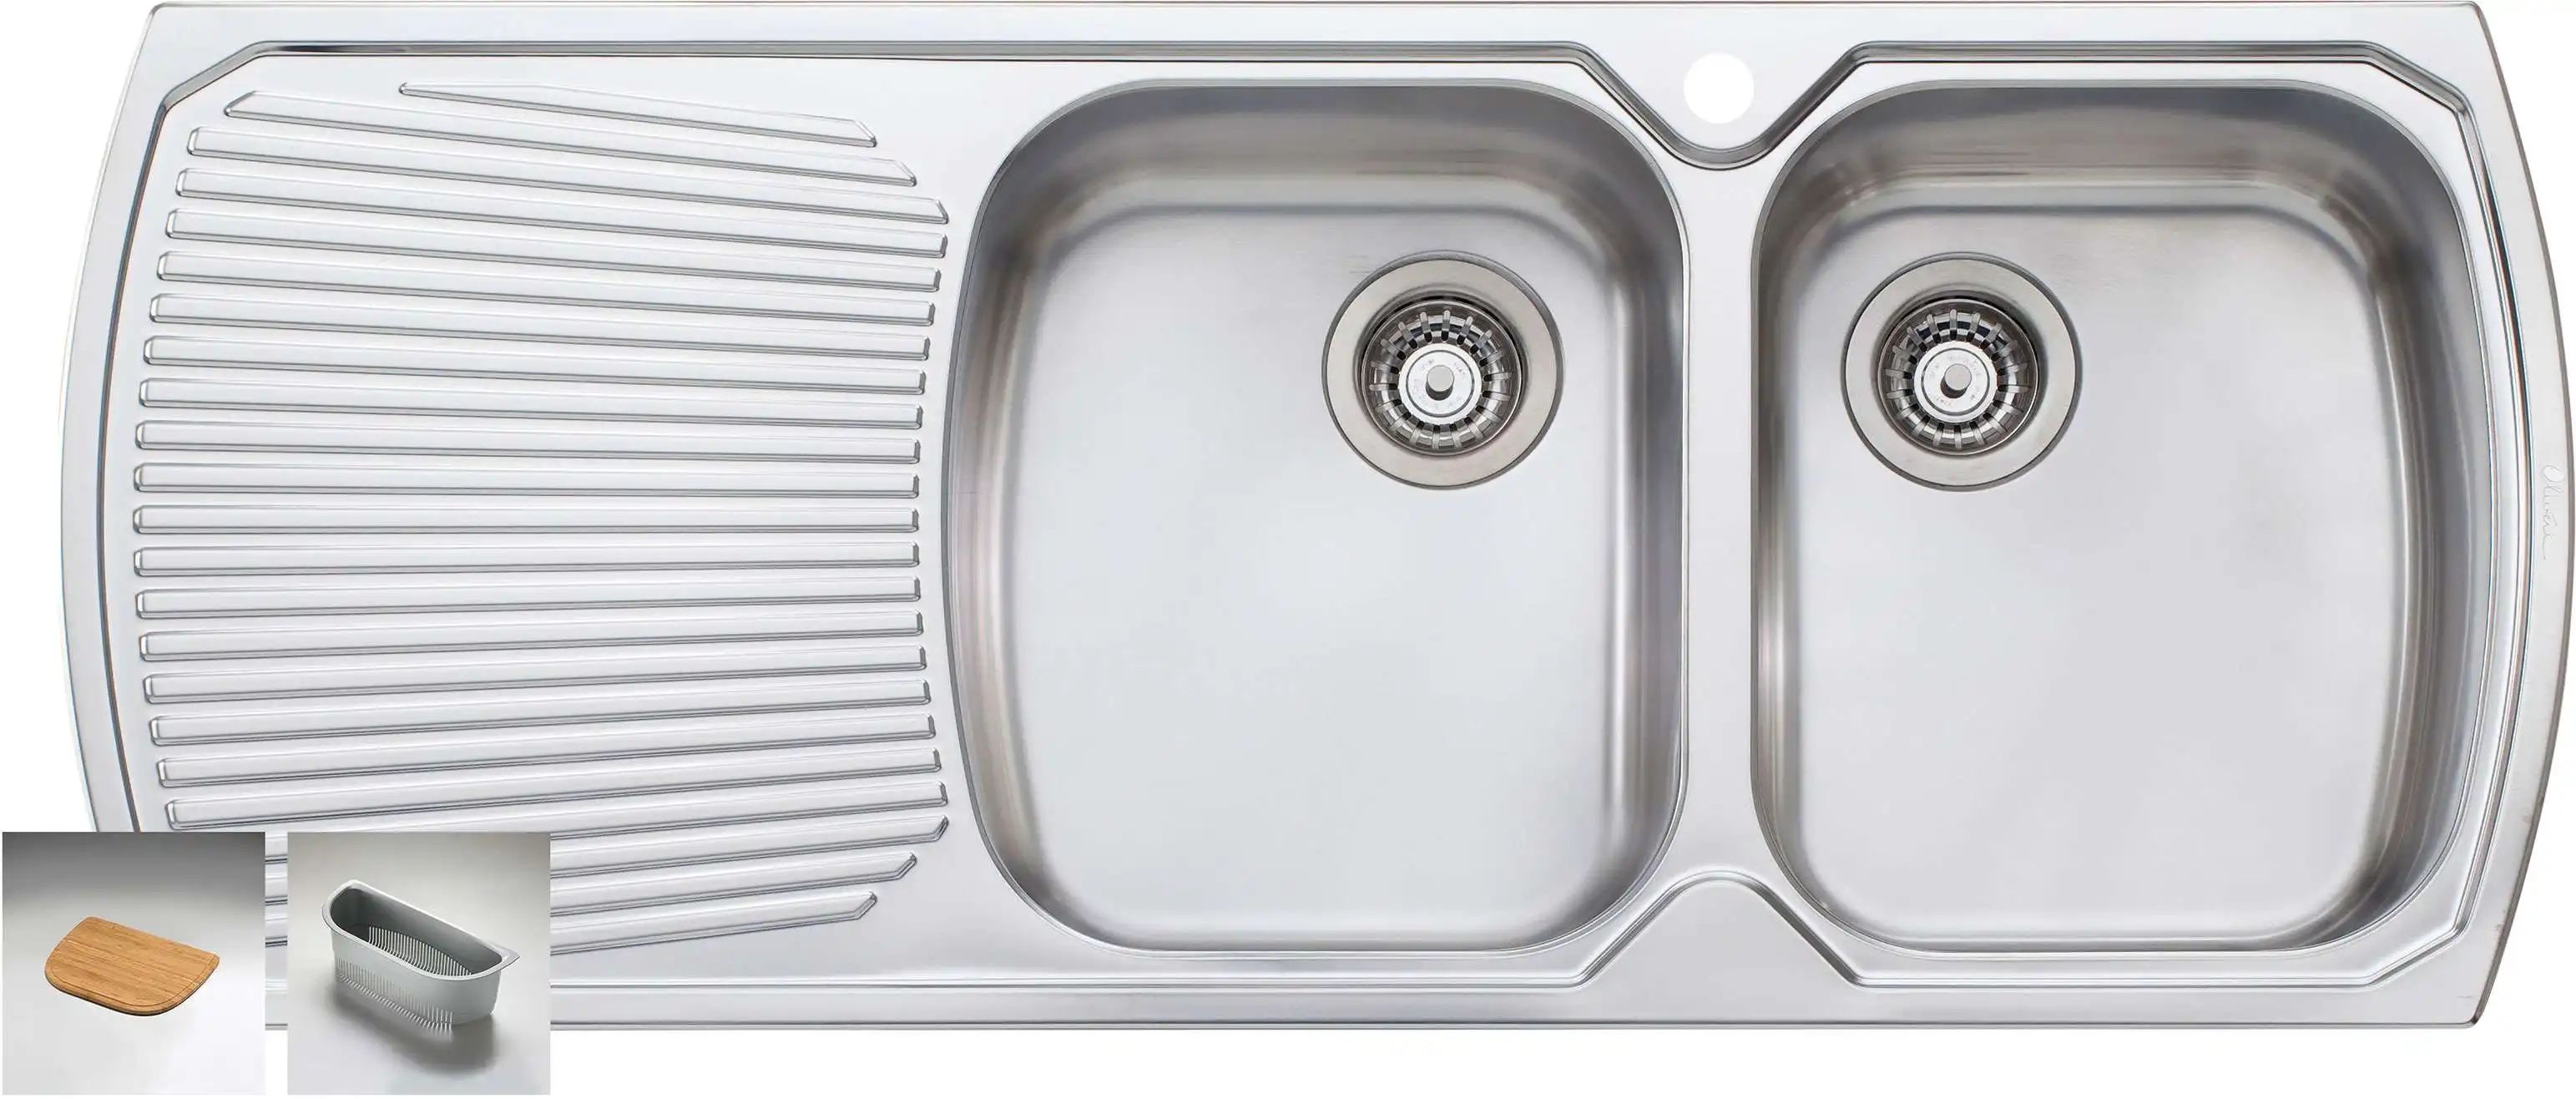 Oliveri Monet Double Right Hand Bowl Inset Sink With Drainer MO772